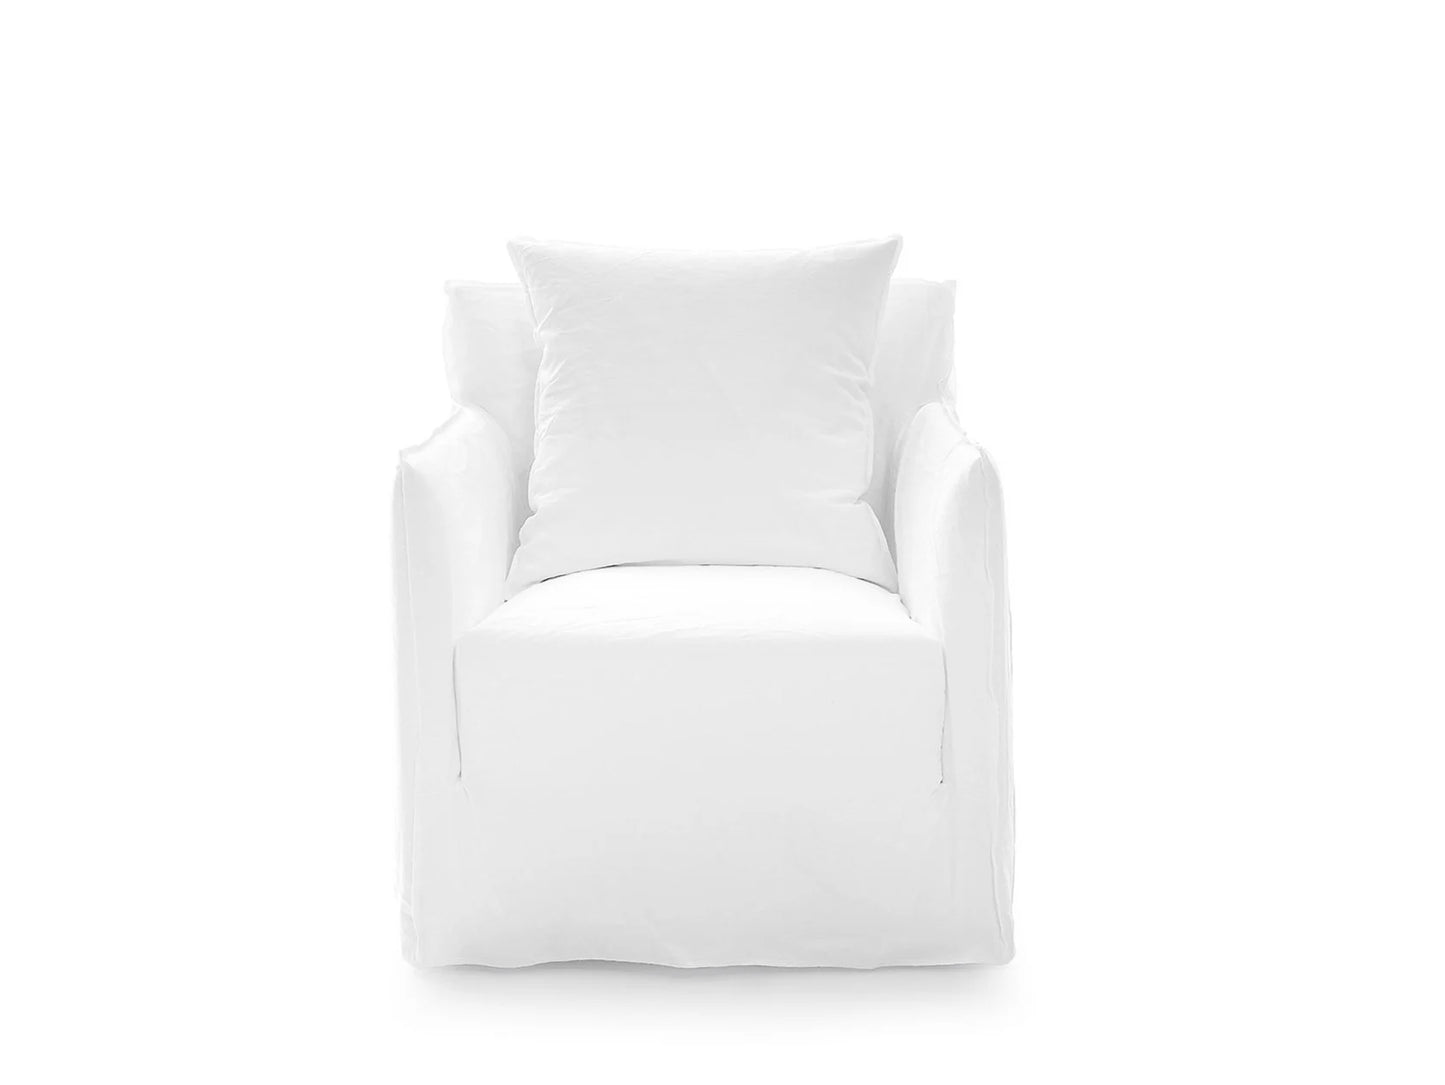 Gervasoni Ghost 05 Armchair in White Linen Upholstery by Paola Navone - $2,050.00